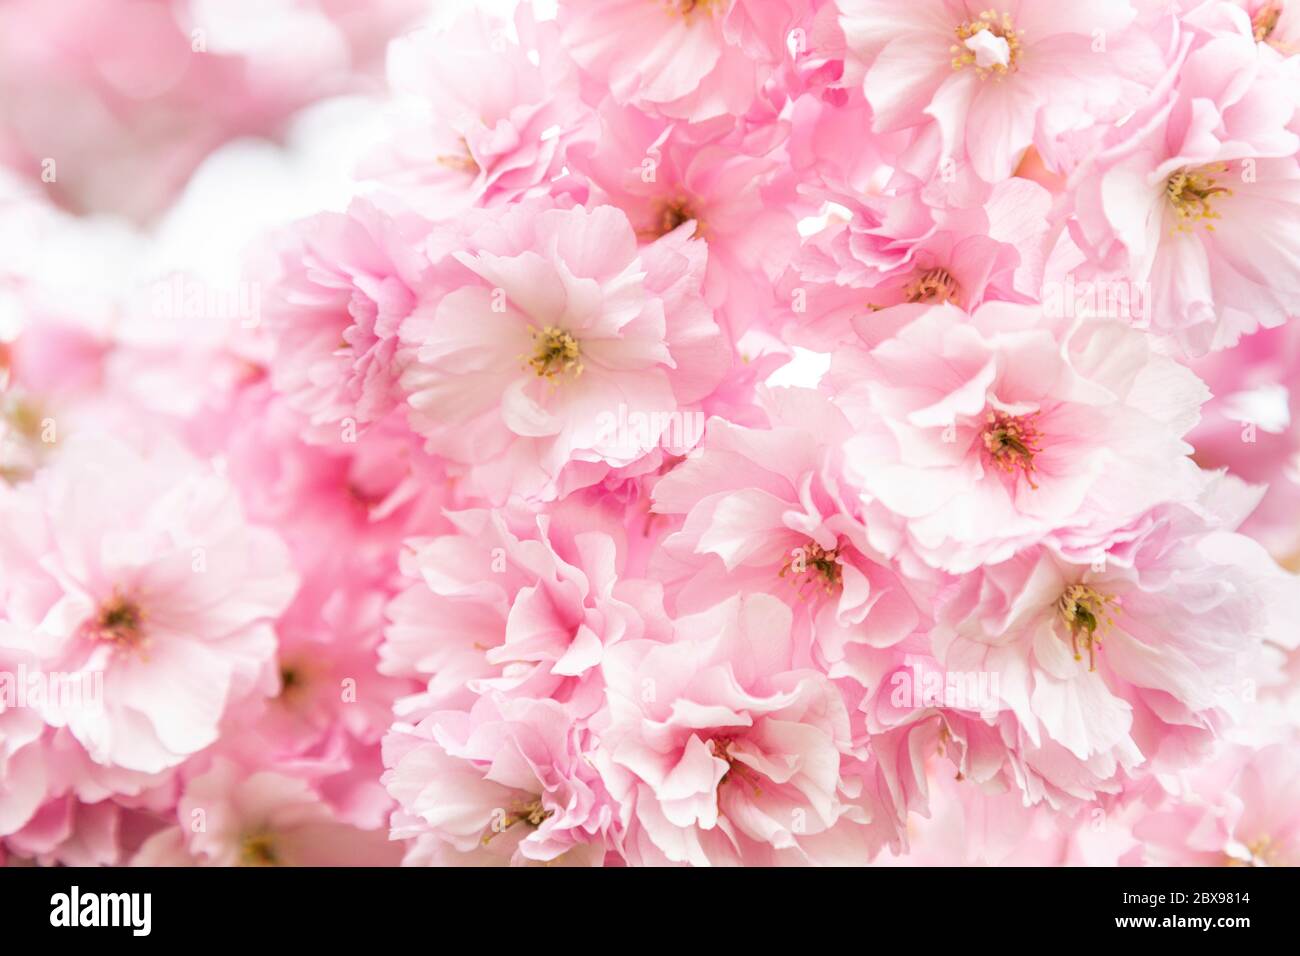 Light pink delicate cherry blossoms background Stock Photo